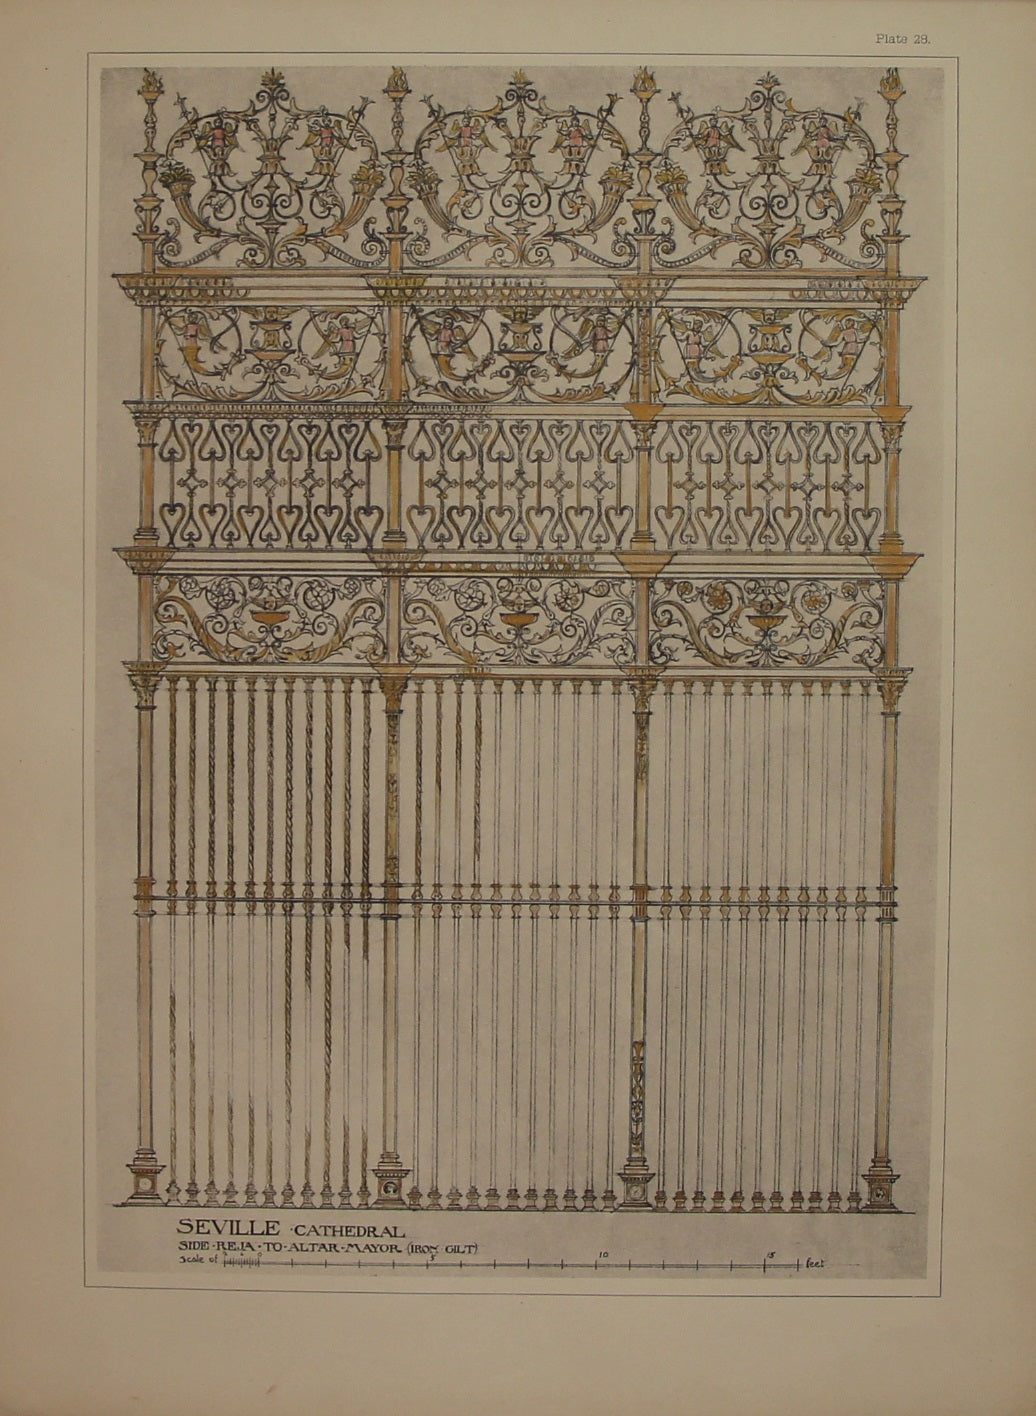 Architecture, Spanish Renaissance, Plate 28, Seville, Cathedral, Side, Reja to Alter, Iron Gilt ,